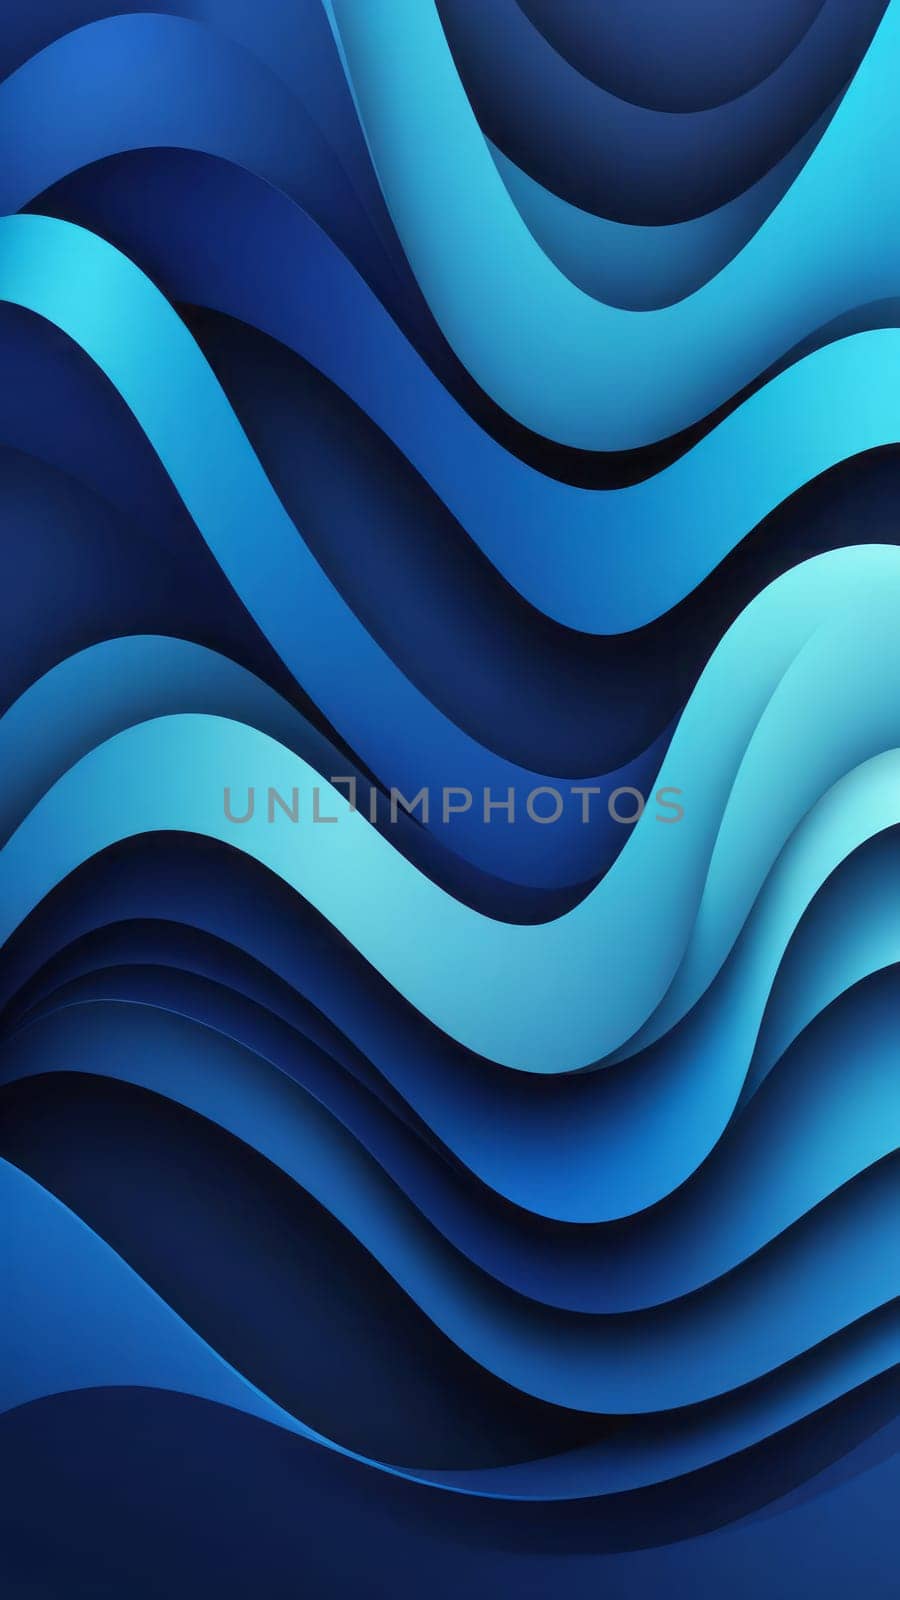 Creativity in paints from Waved shapes and blue by nkotlyar